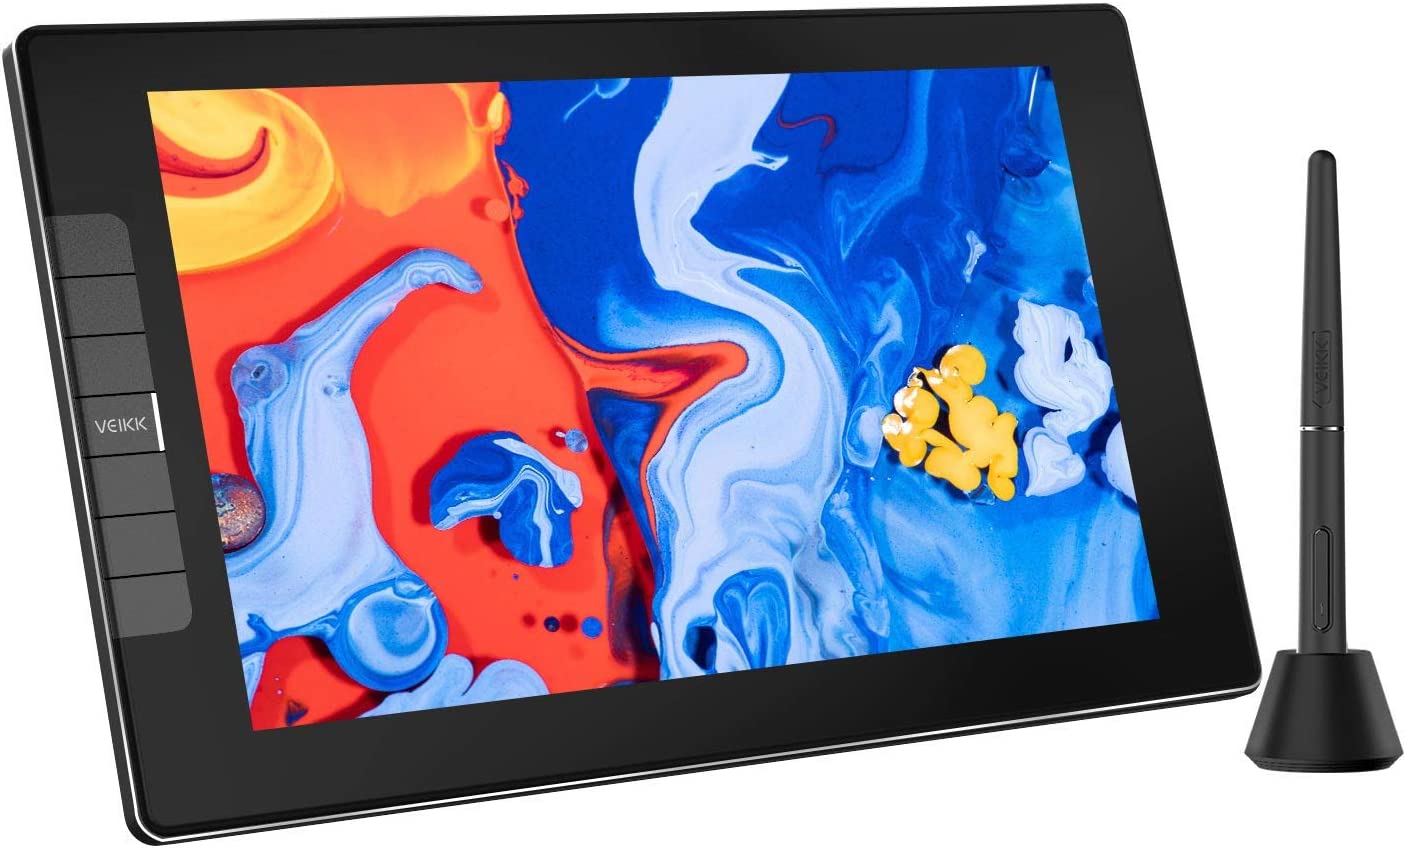 VEIKK VK1200 Drawing Tablet with Screen, 11.6 Inch [...]